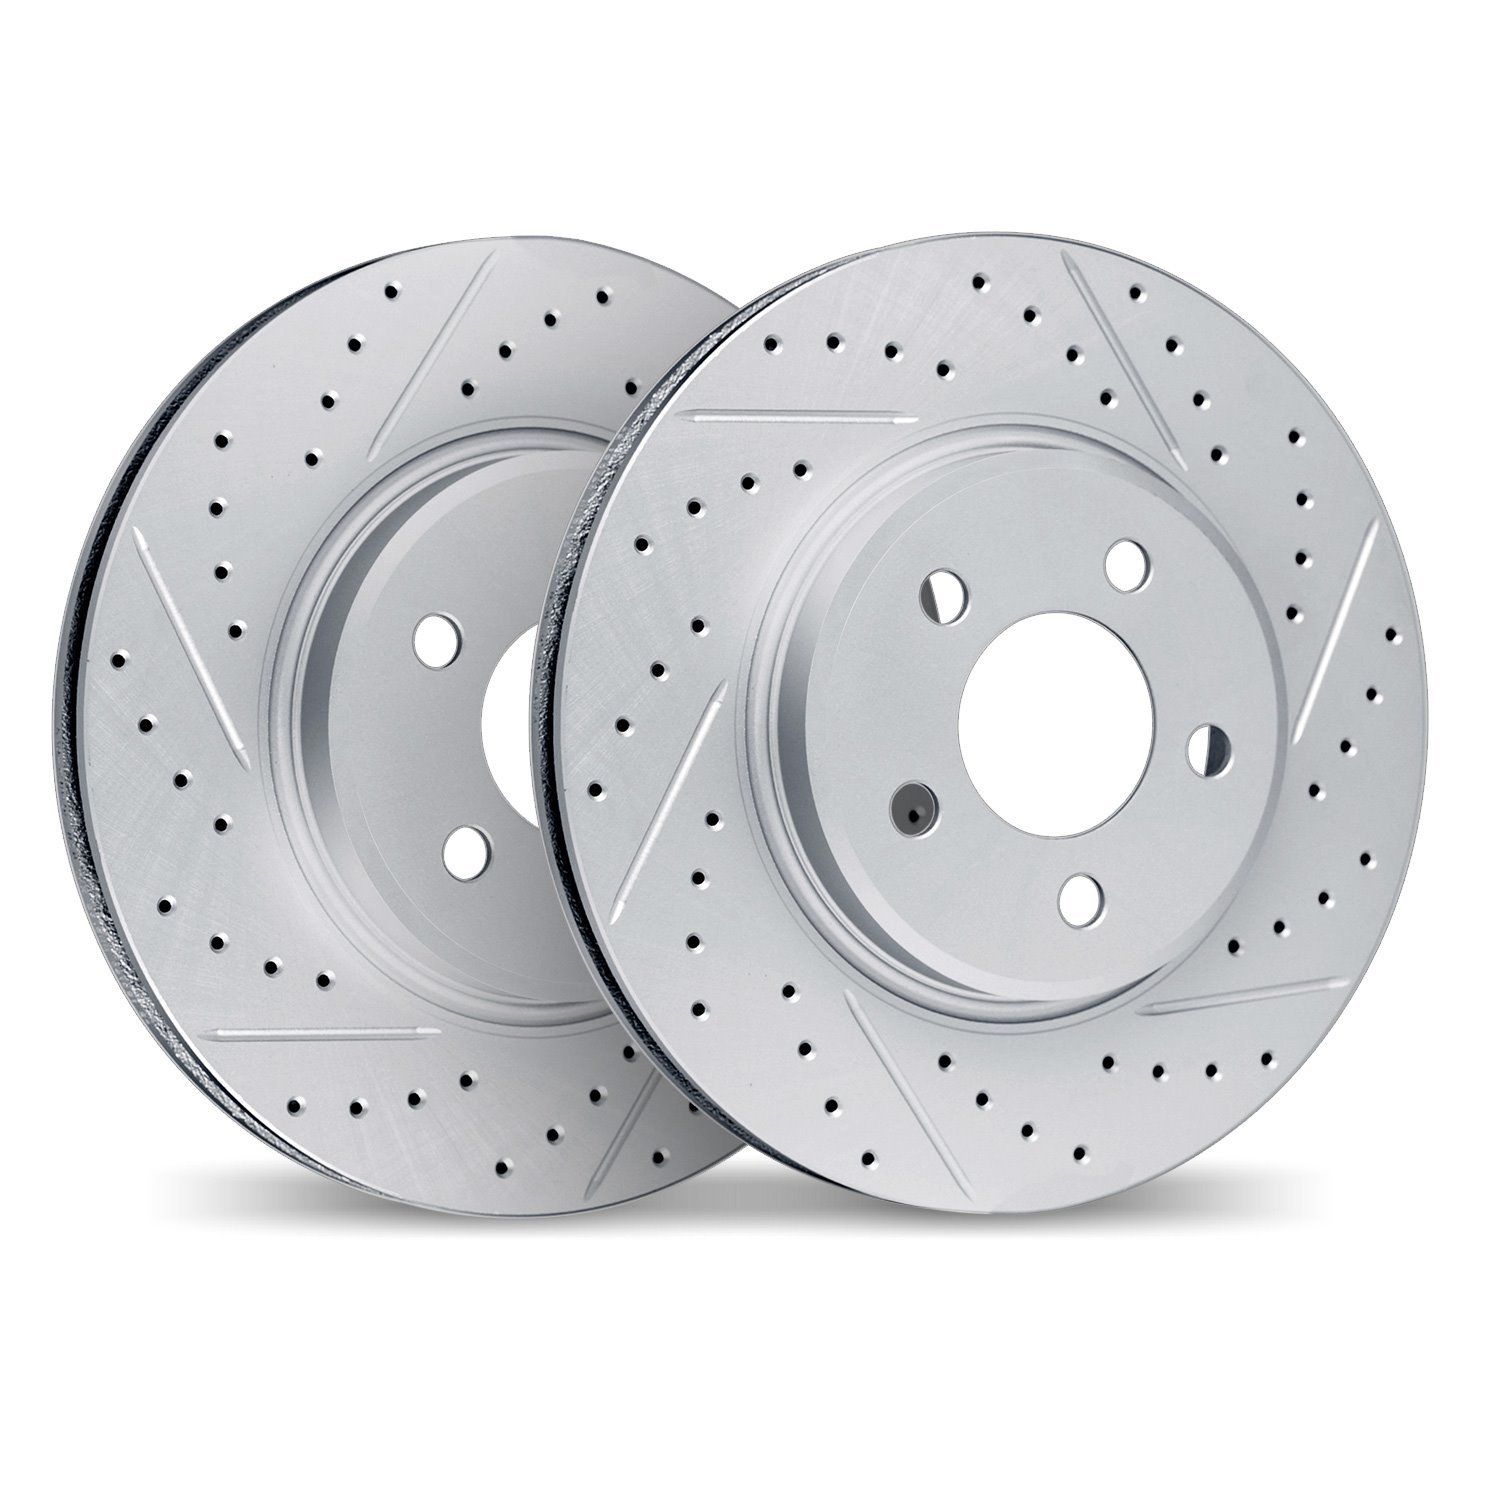 2002-31082 Geoperformance Drilled/Slotted Brake Rotors, 2002-2005 BMW, Position: Rear